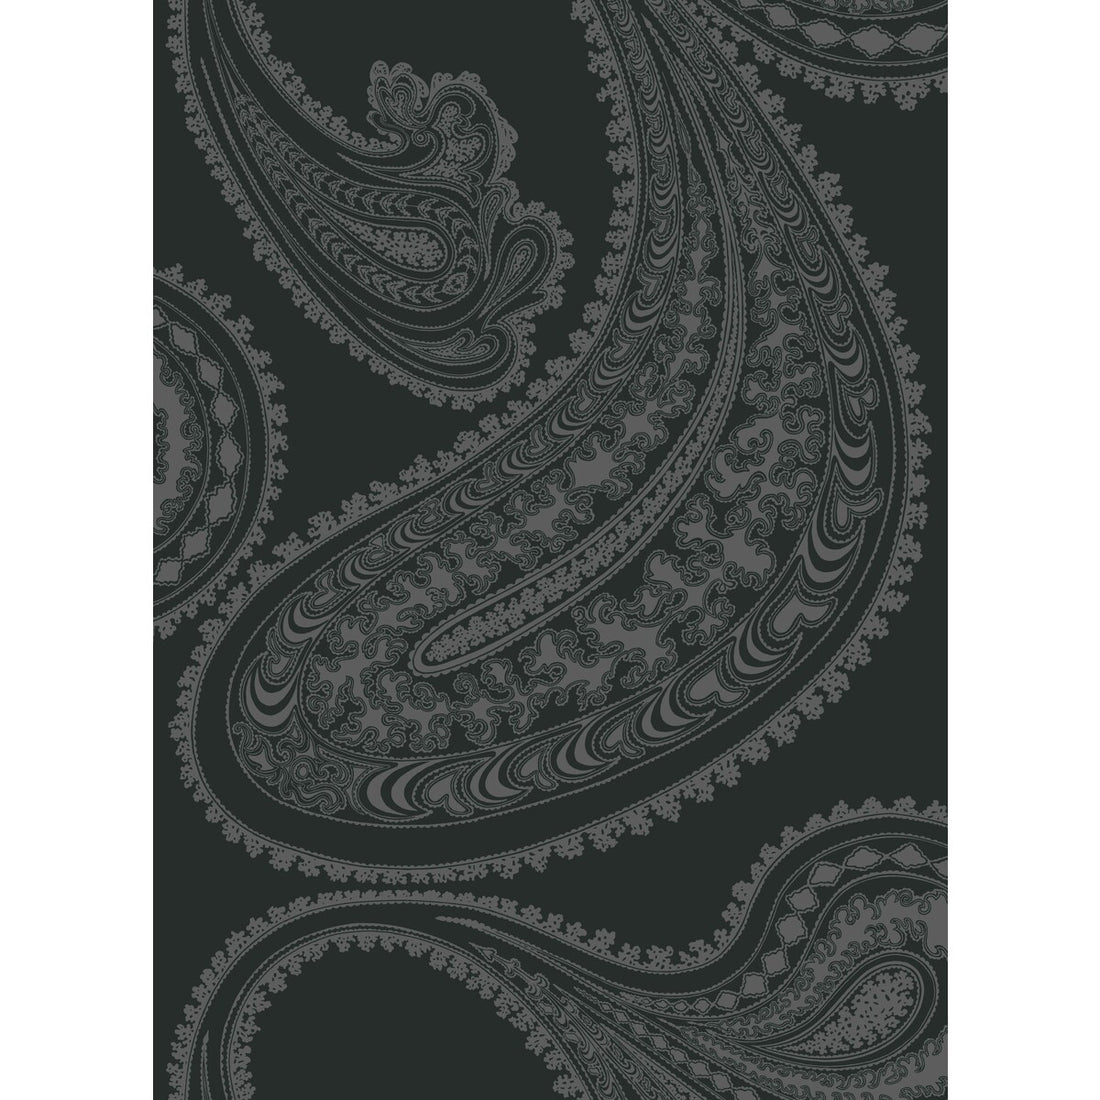 Rajapur fabric in char blk color - pattern F111/10037.CS.0 - by Cole &amp; Son in the Cole &amp; Son Contemporary Fabrics collection